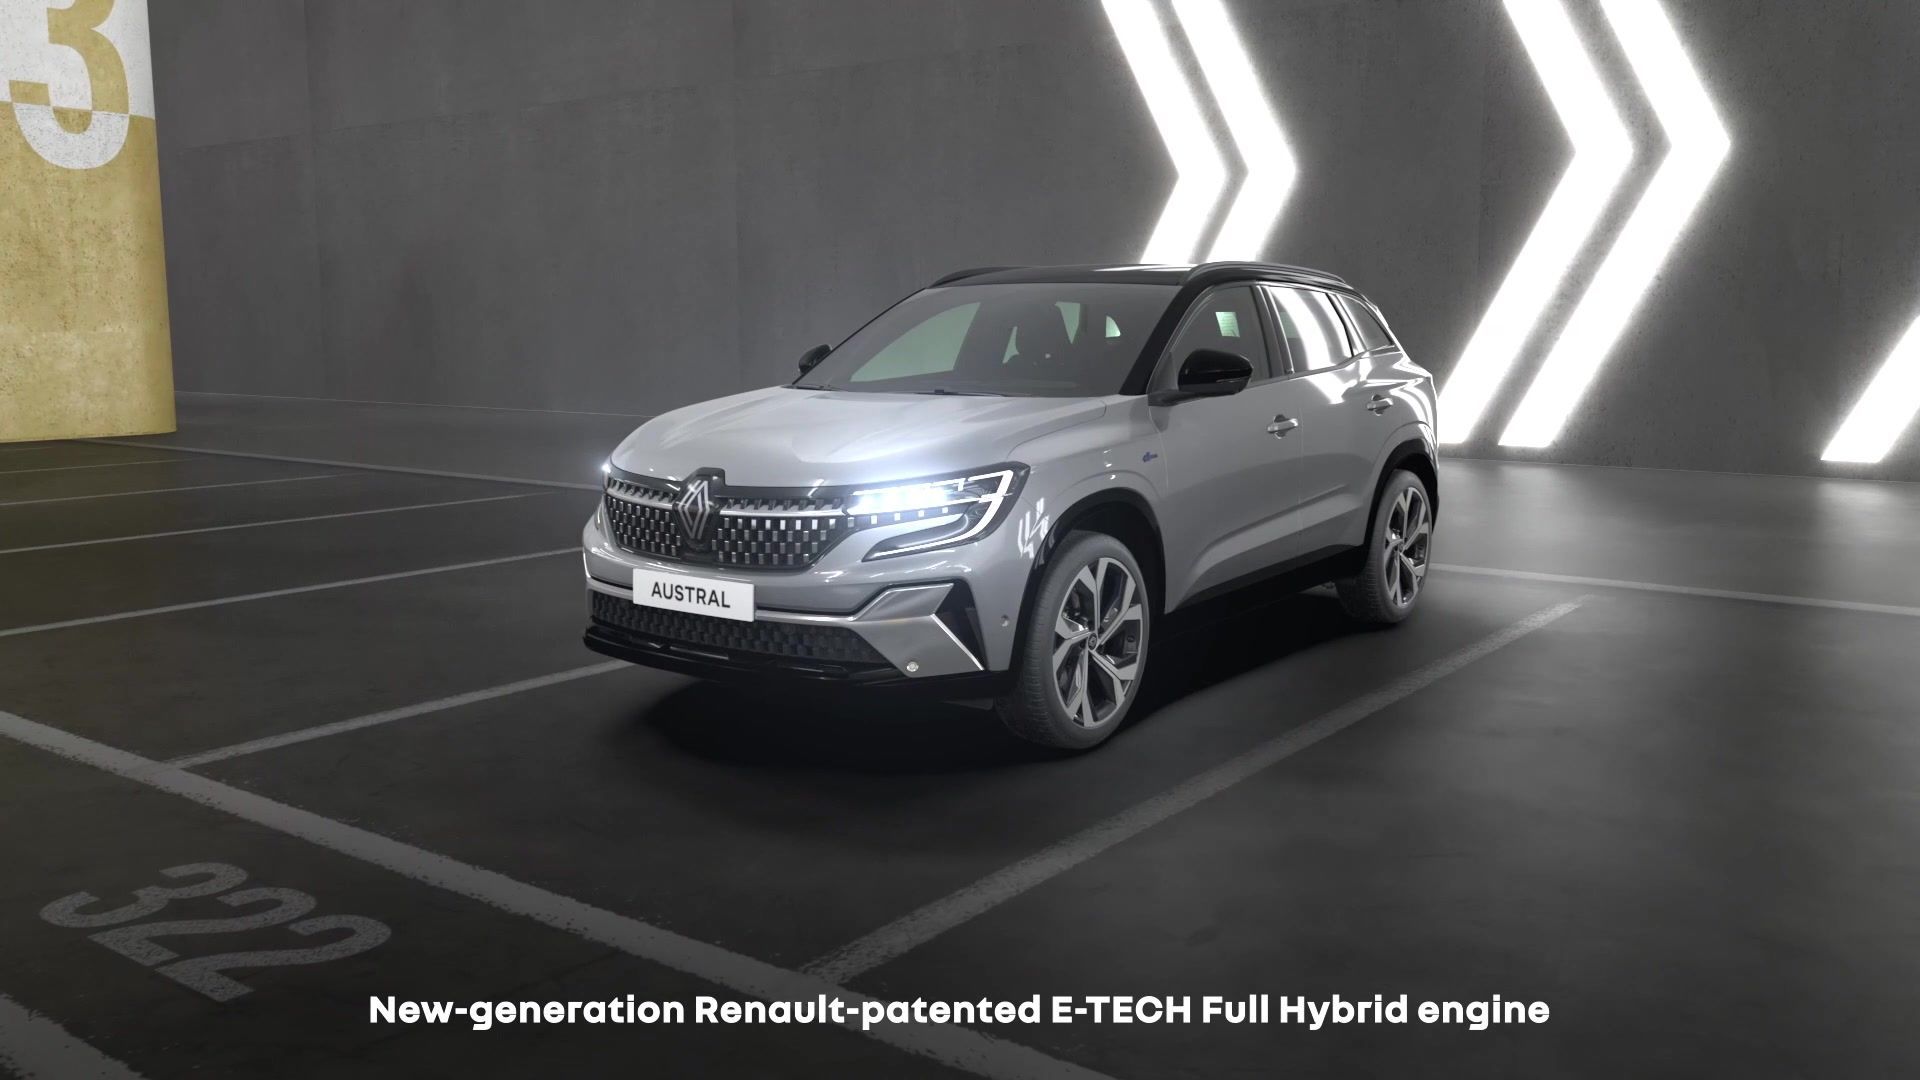 Renault Austral - E-TECH hybrid engine - combining power and efficiency